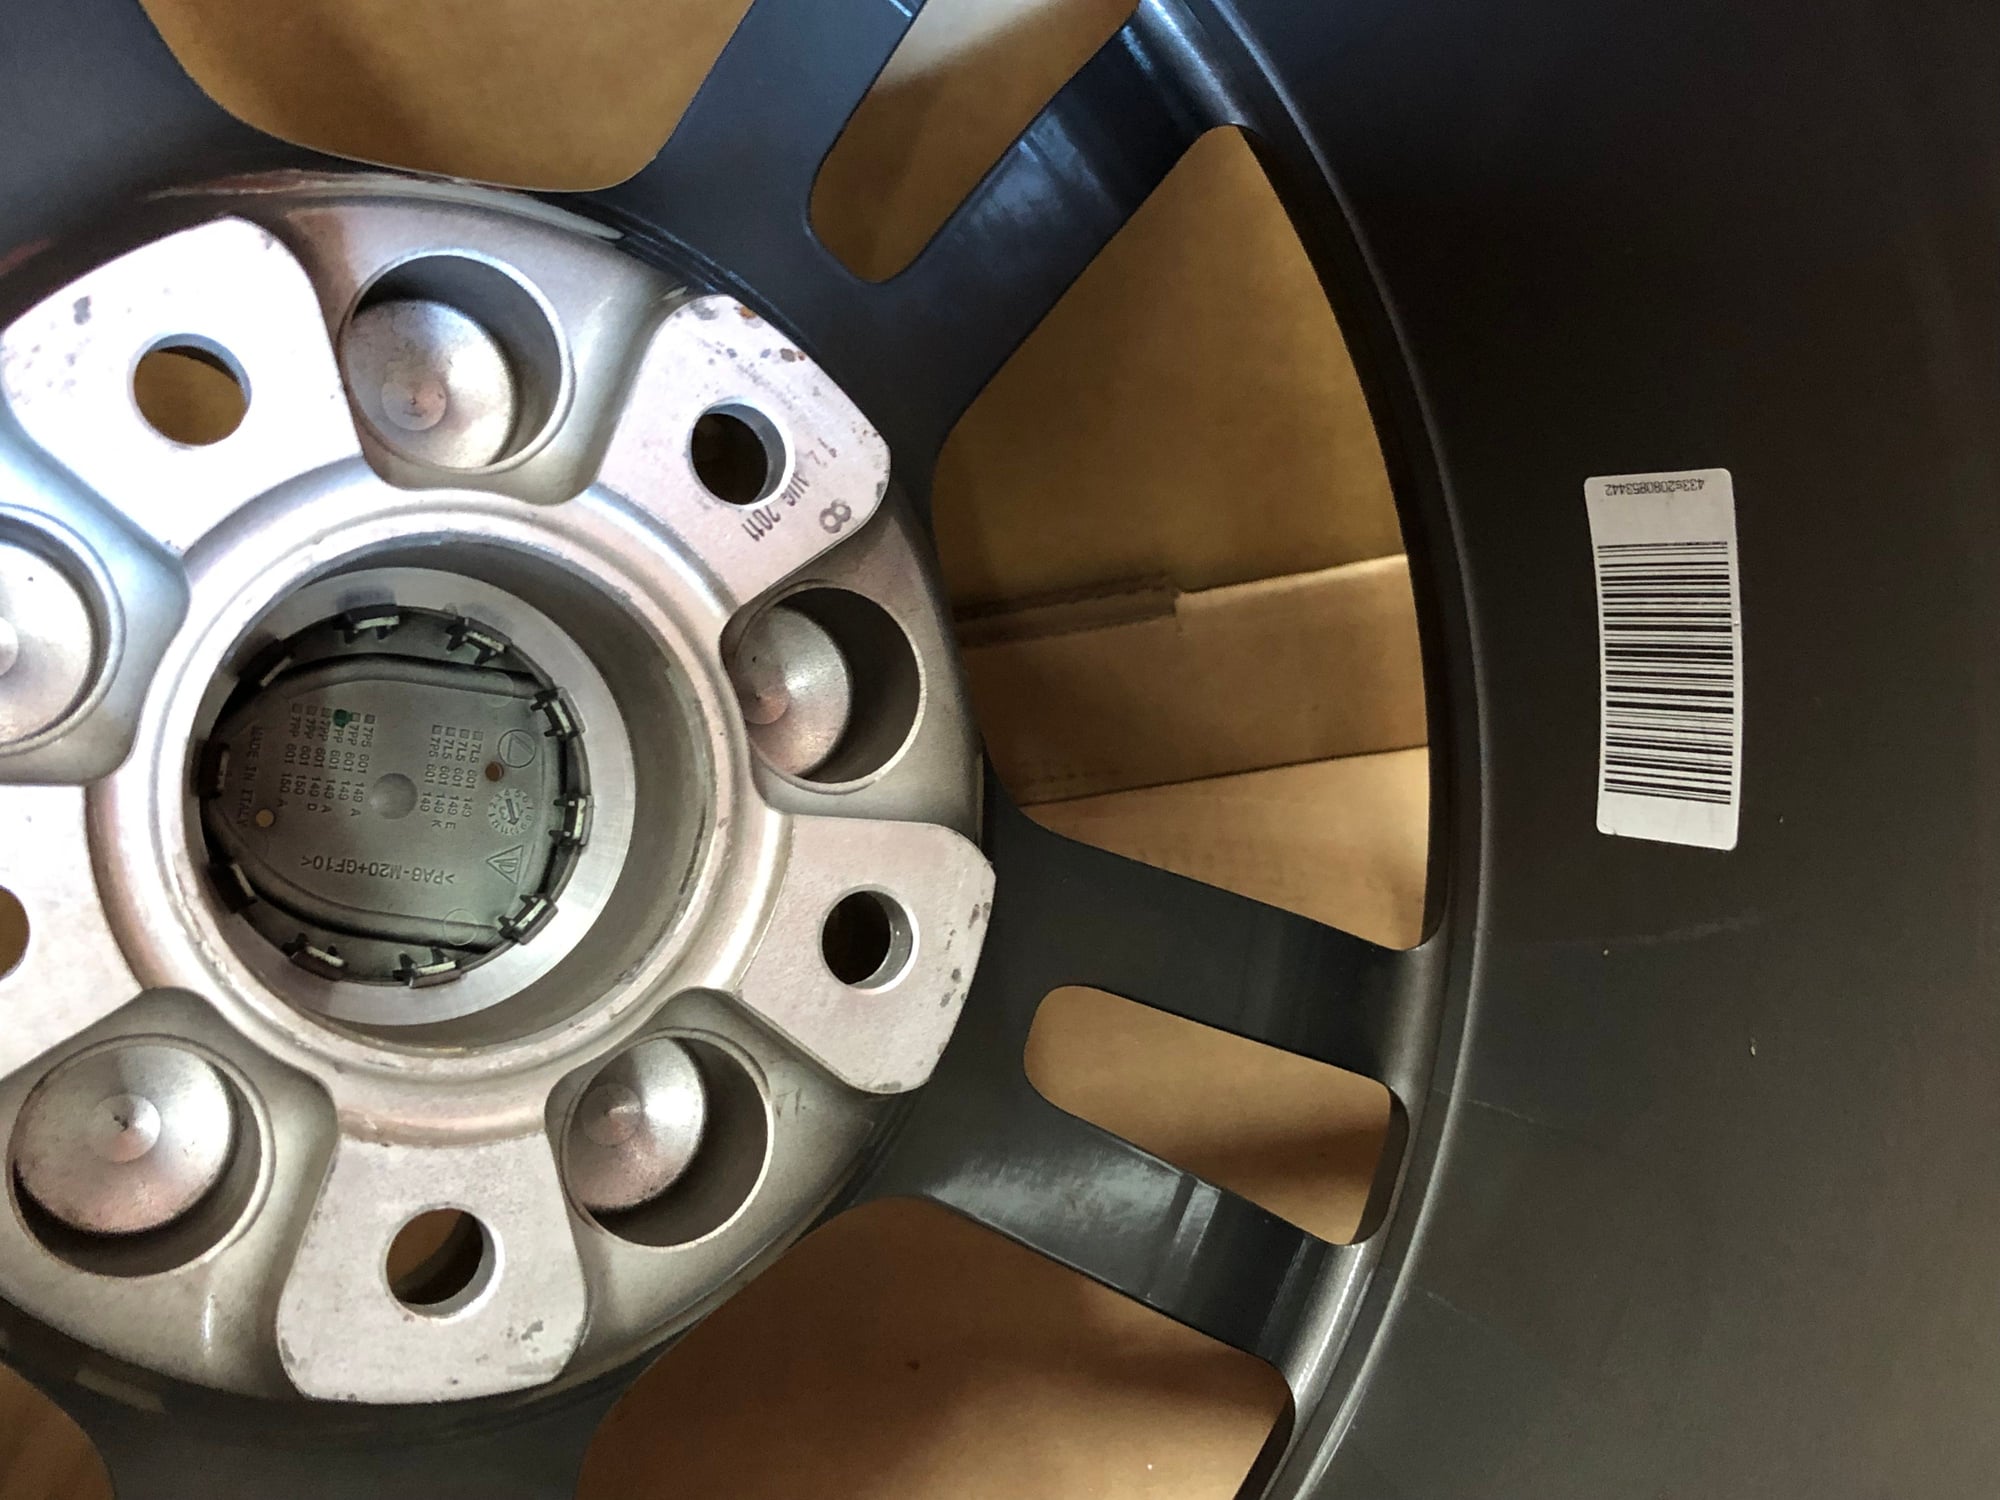 Wheels and Tires/Axles - Porsche OEM Turbo II Style wide body 997 911 Wheels - Used - 2005 to 2012 Porsche Carrera - Bronx, NY 10452, United States